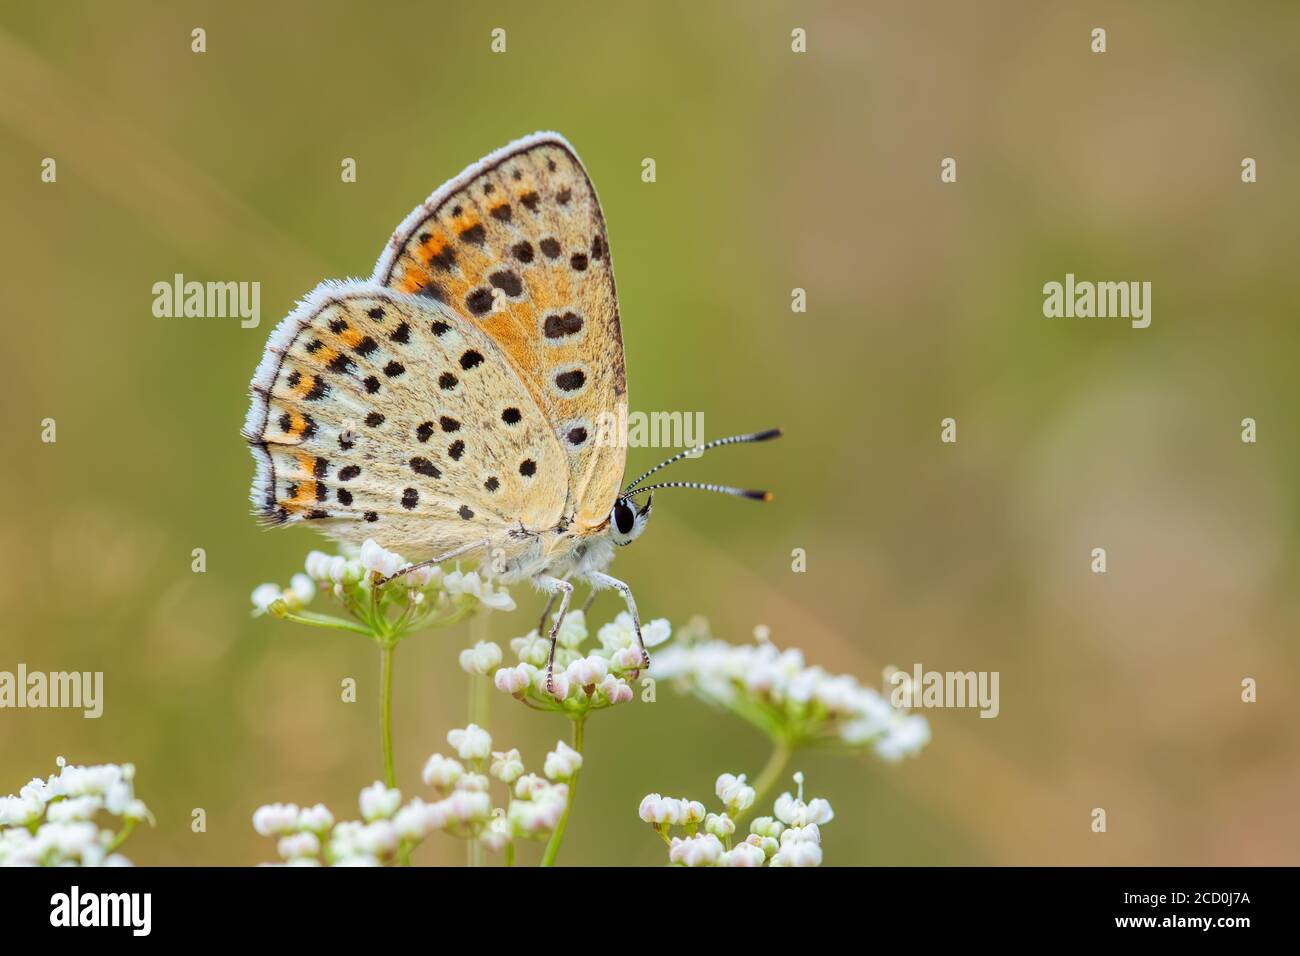 Sooty Copper butterfly - Lycaena tityrus, beautiful colored butterfly from European meadows and grasslands, Zlin, Czech Republic. Stock Photo